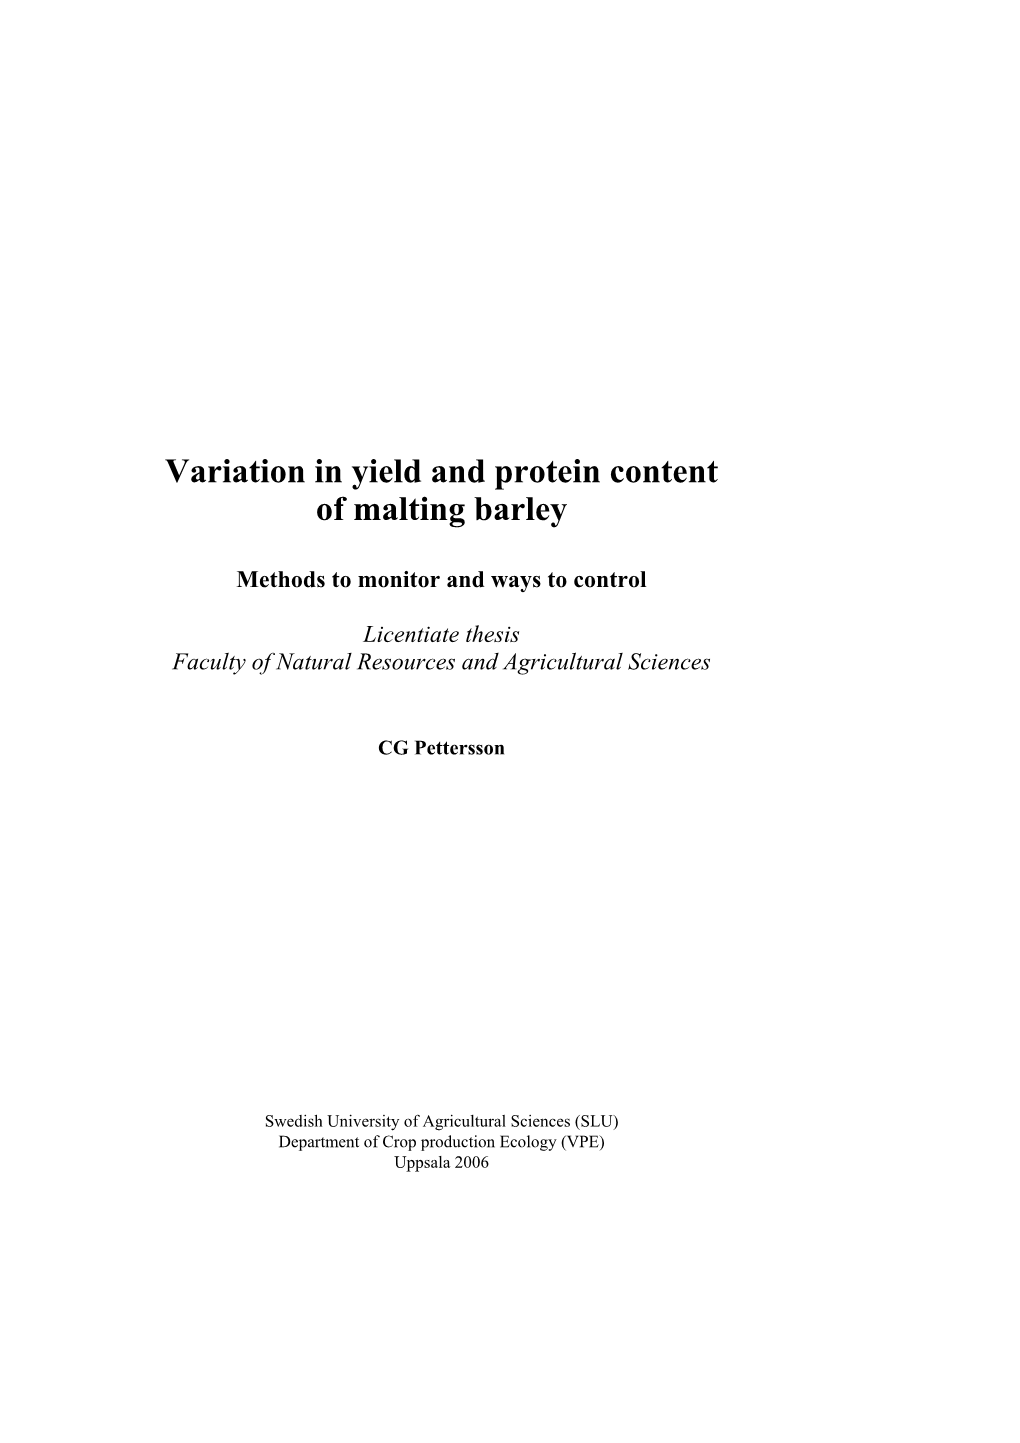 Variation in Yield and Protein Content of Malting Barley